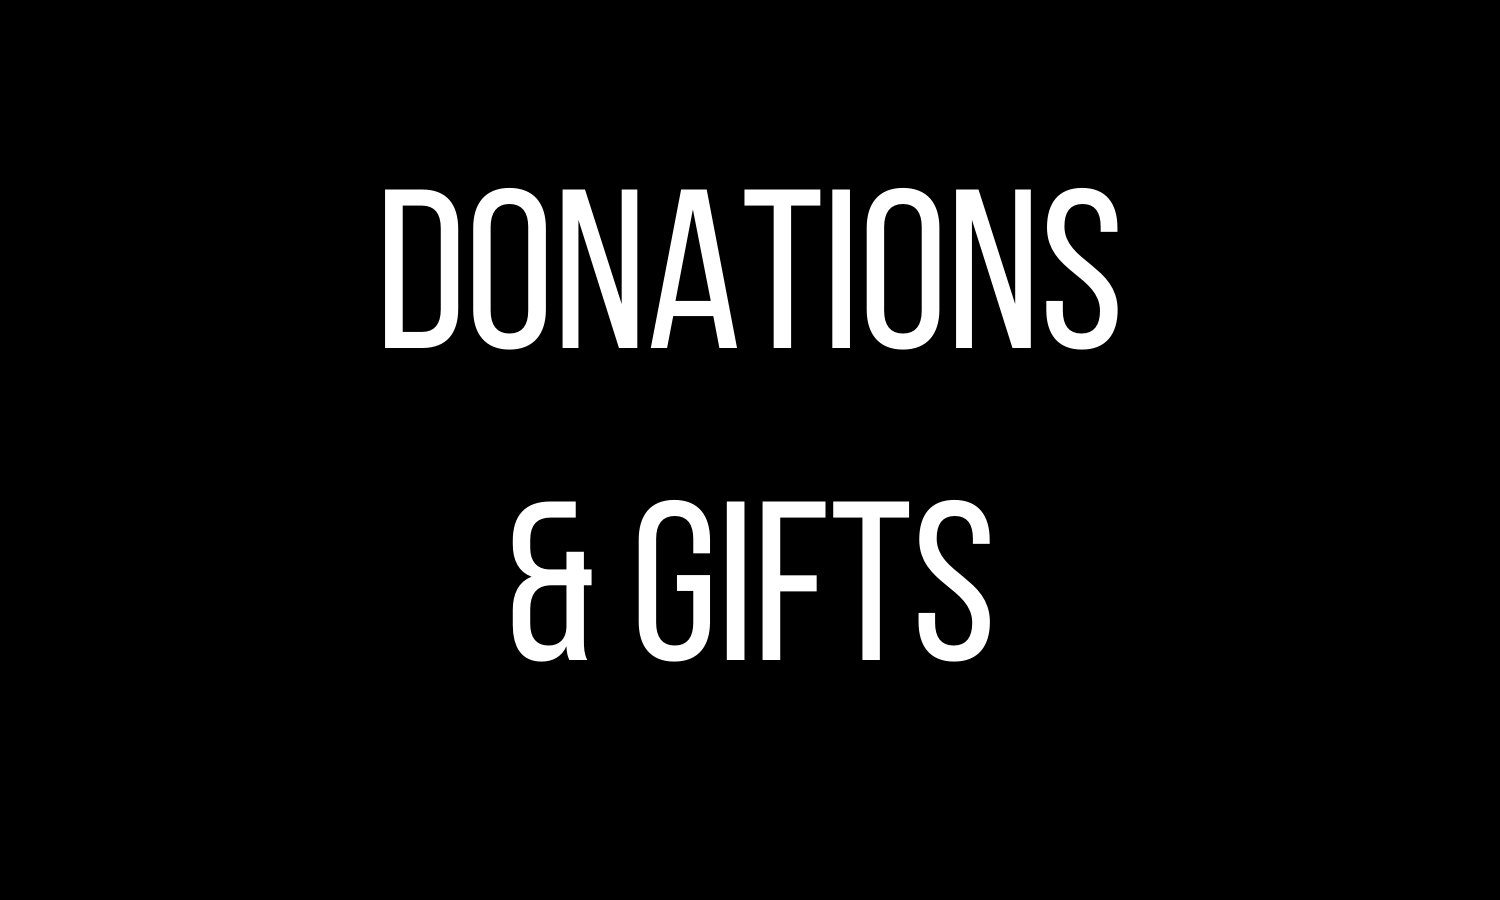 Donations & Gifts